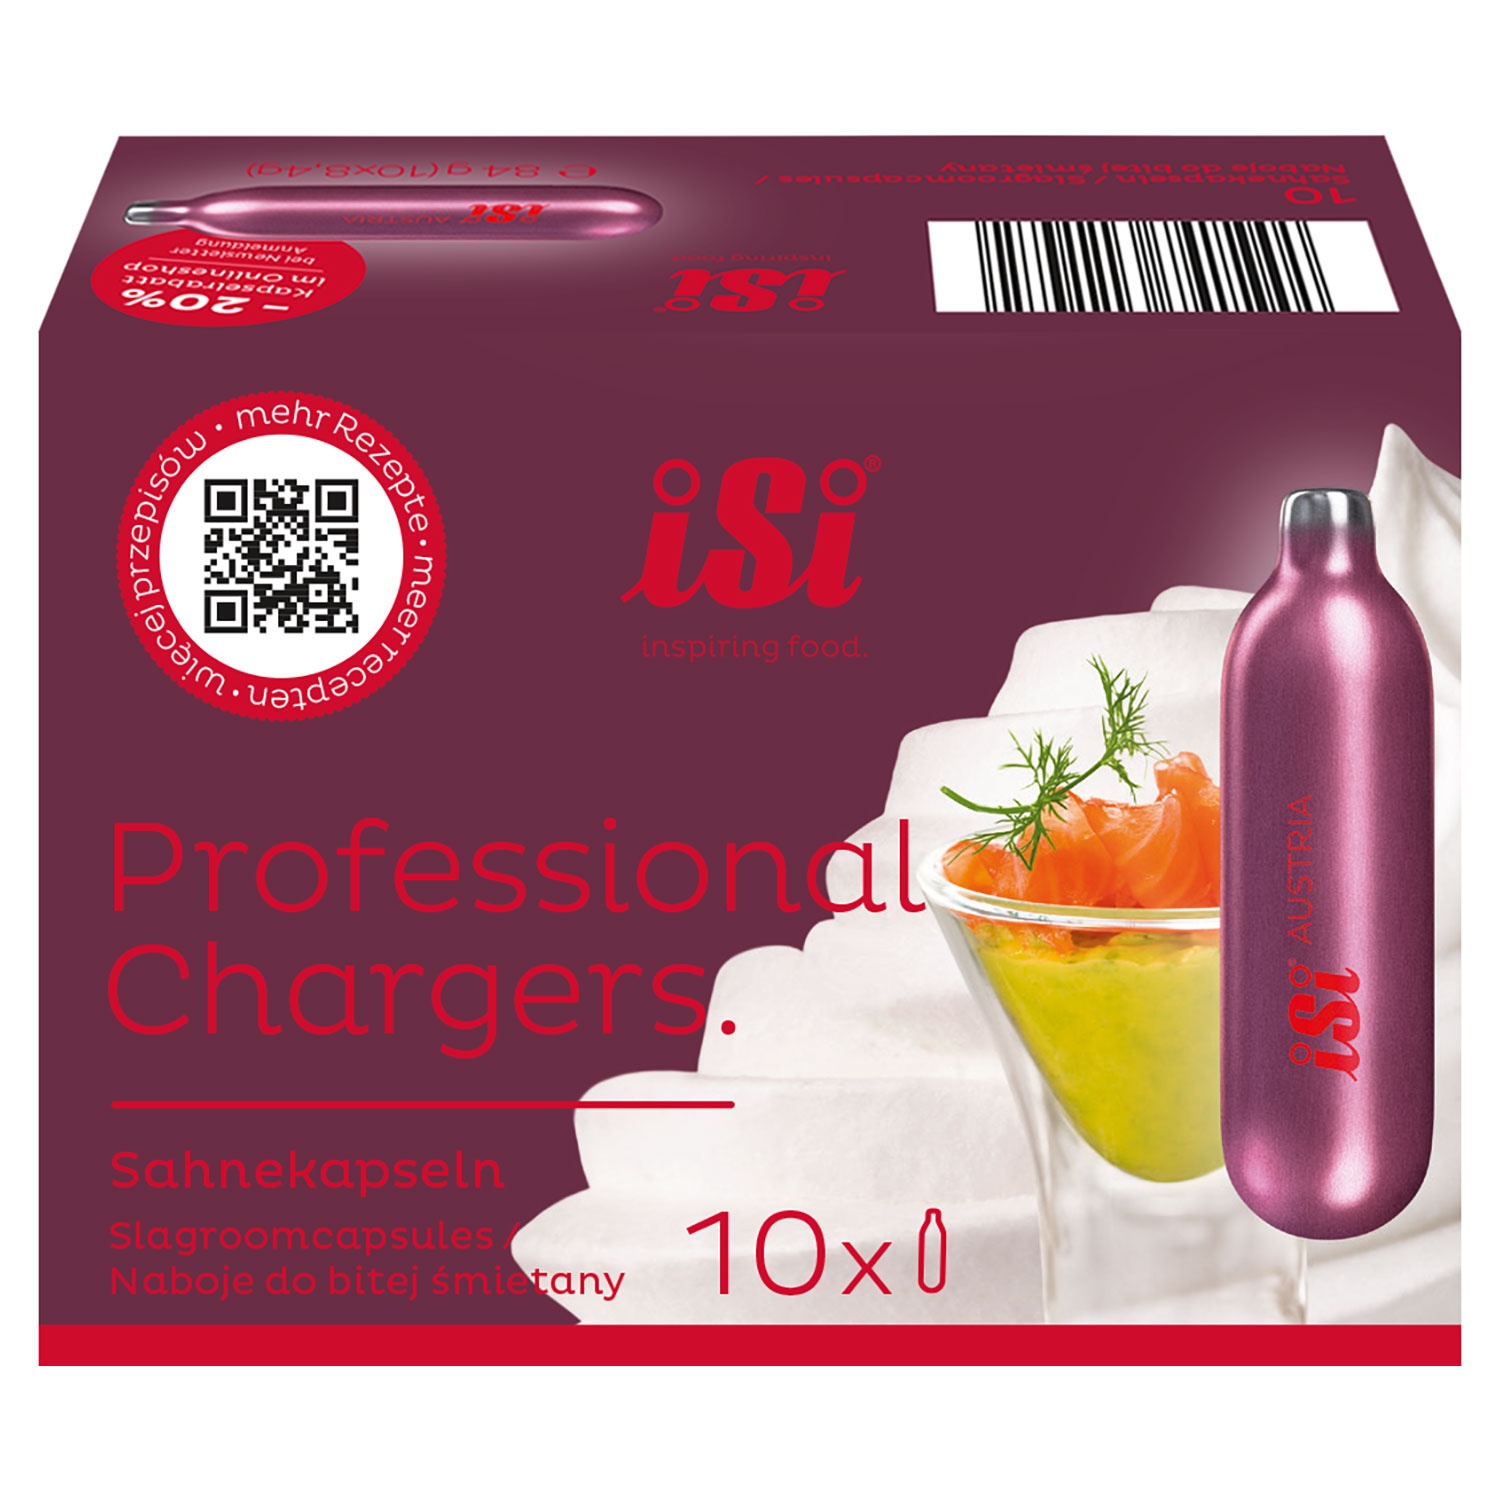 ISI® Professional Chargers Sahnekapseln 10er-Packung